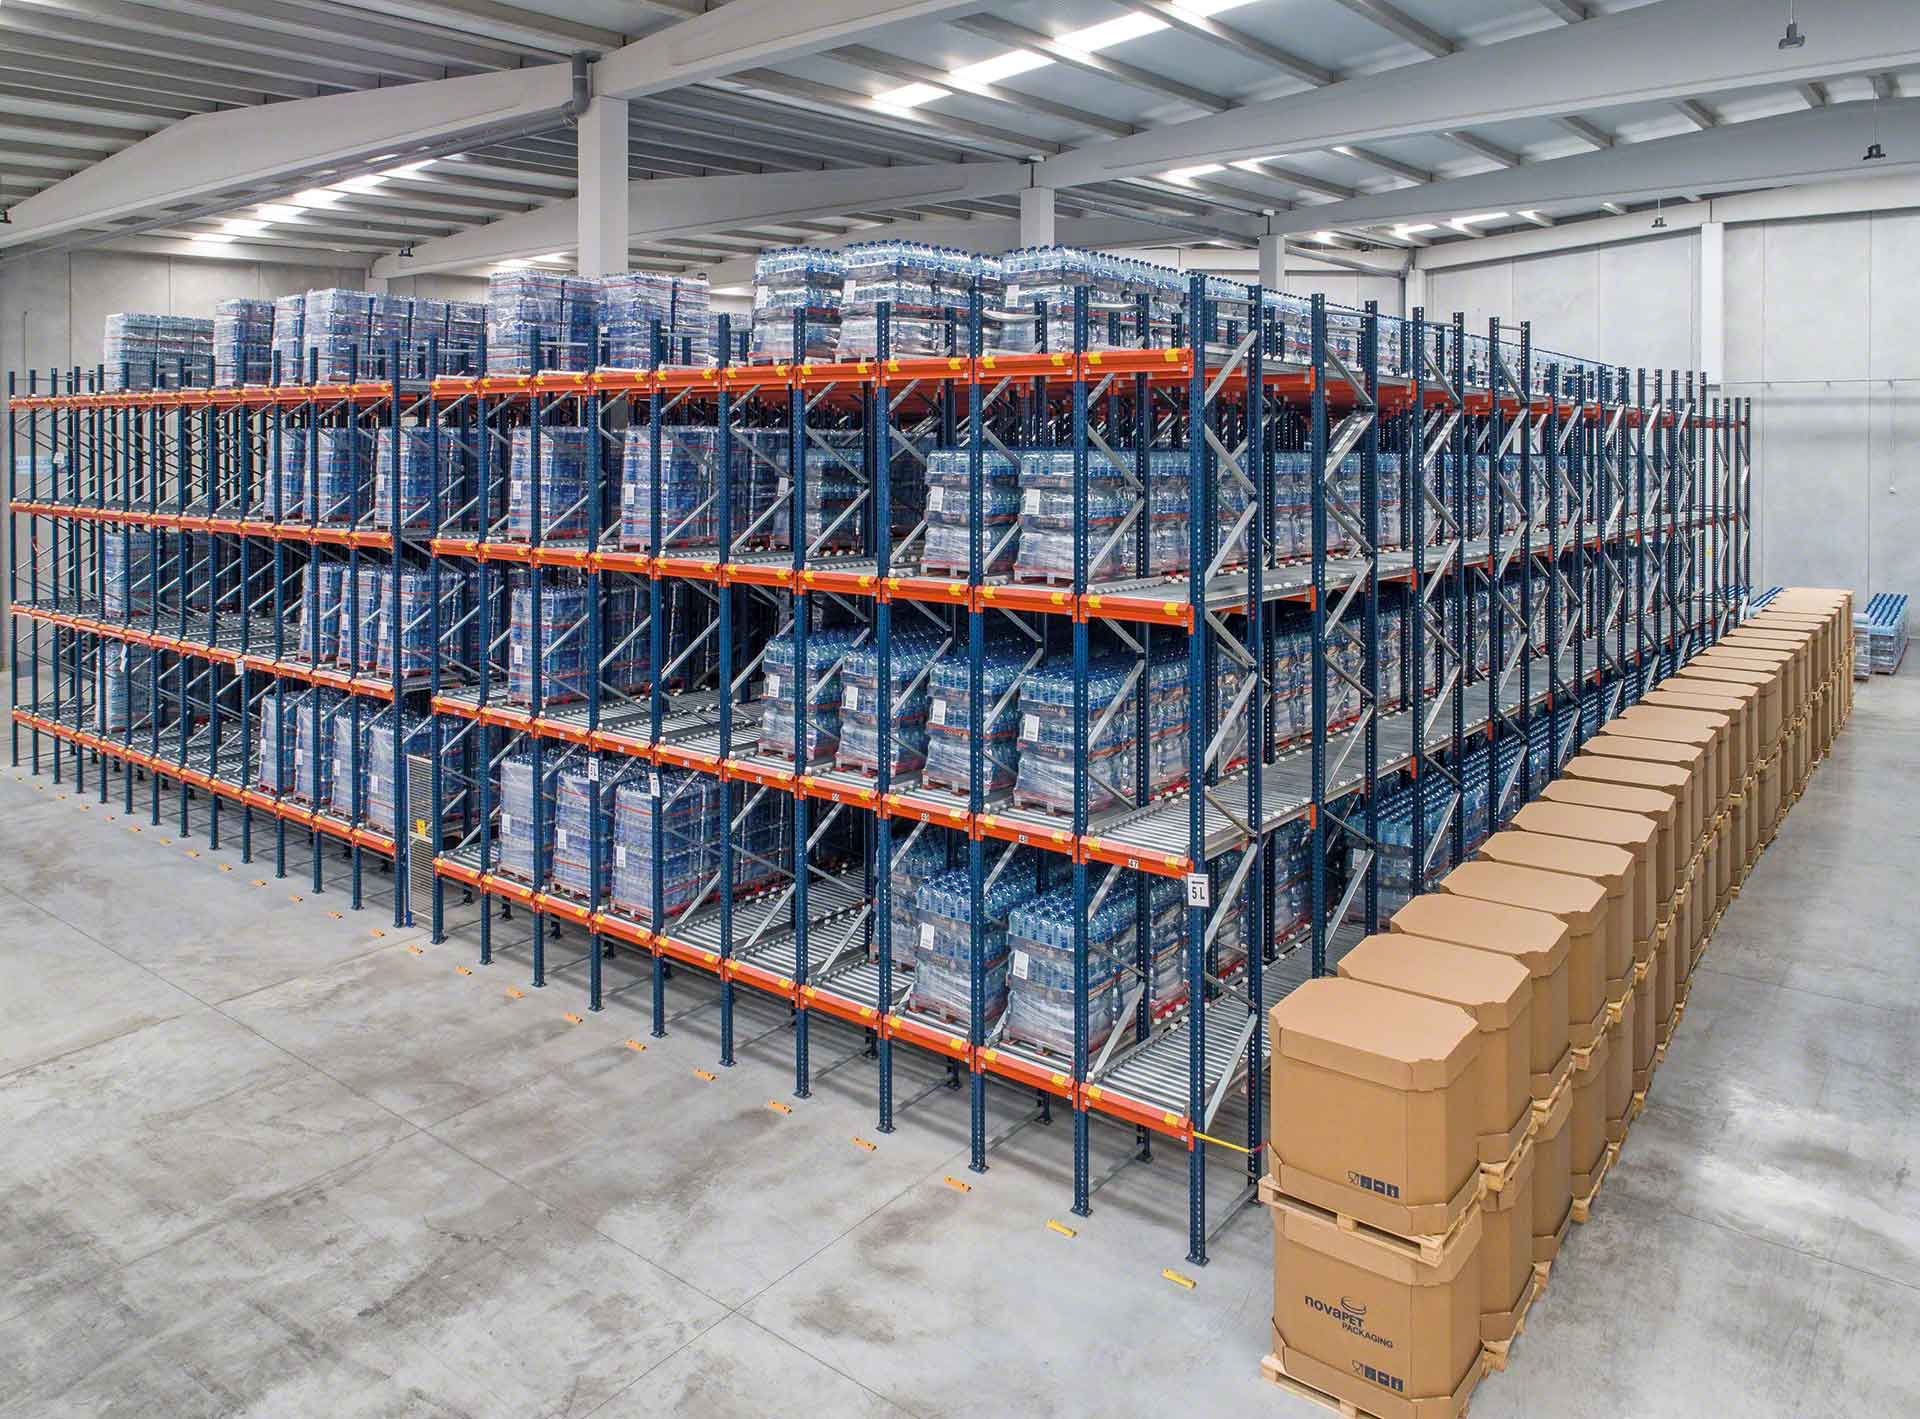 Warehouse equipped with live pallet racking systems with rollers